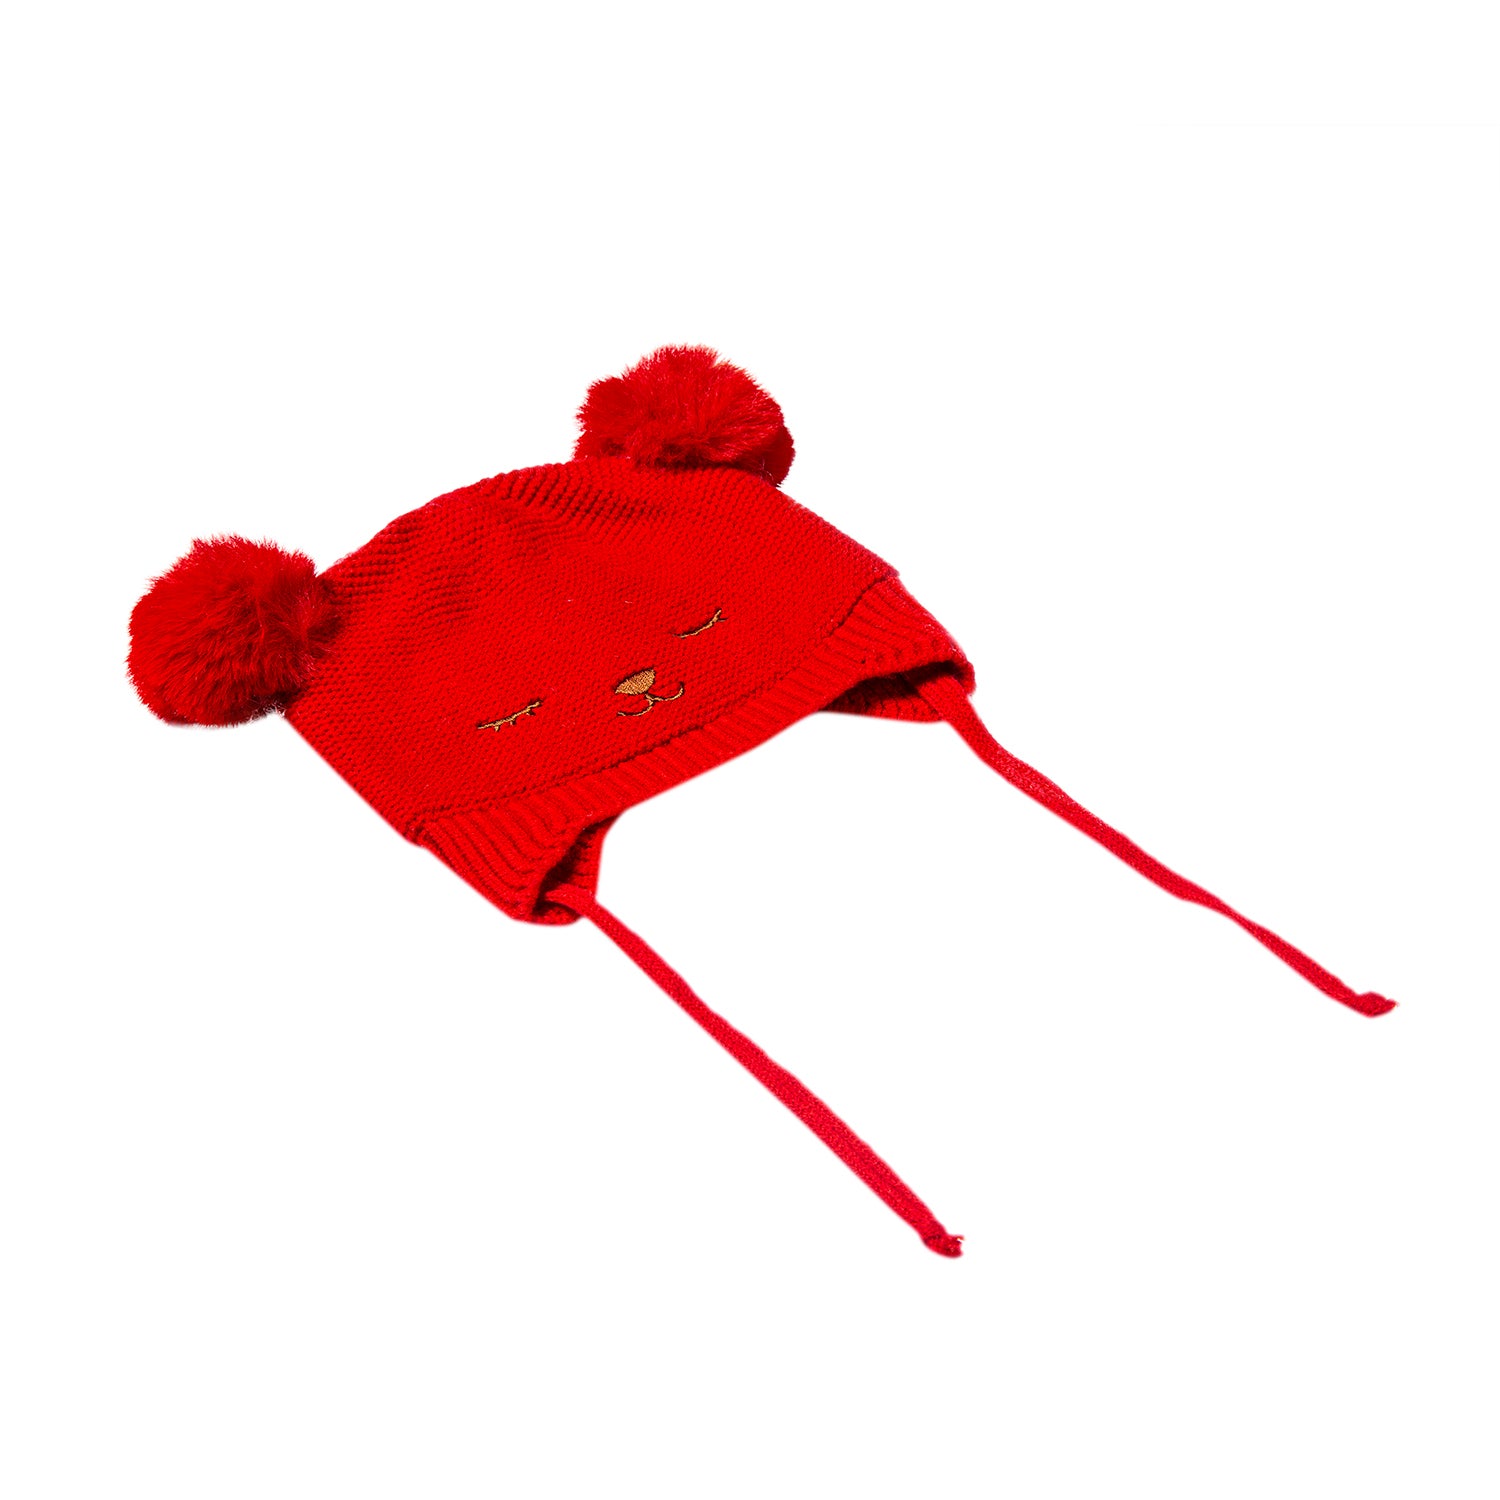 Baby Moo Knit Woollen Cap With Tie Knot For Ear Cover Sleeping Pom Pom Red